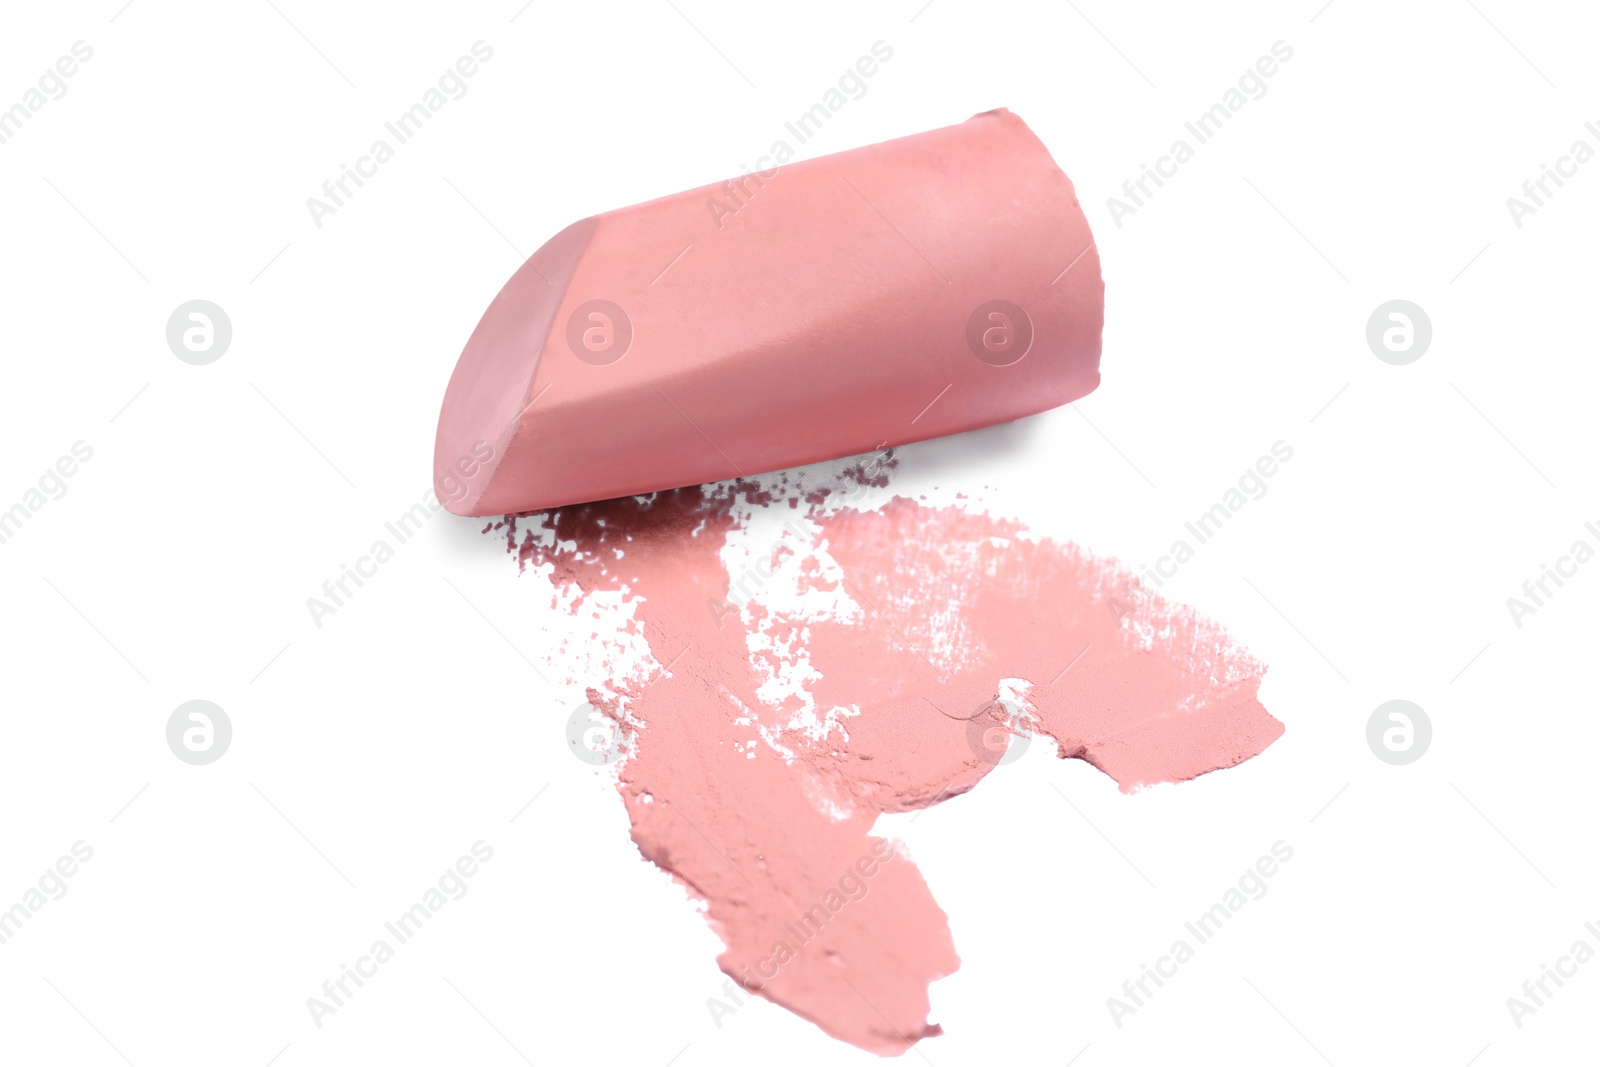 Photo of Nude color lipstick and smear on white background